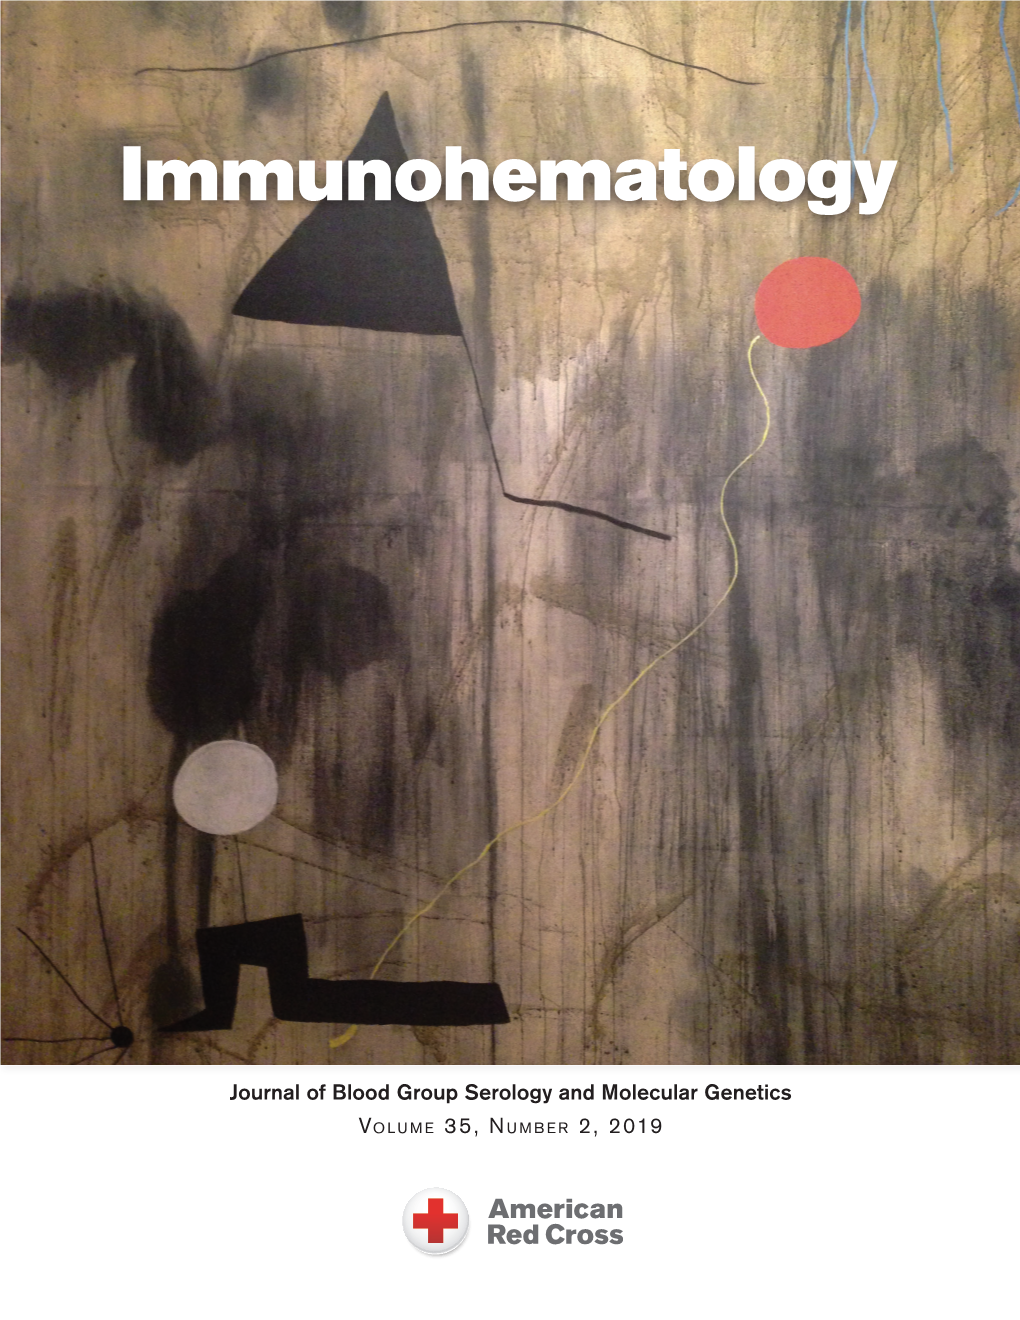 This Issue of Immunohematology Is Supported by a Contribution From